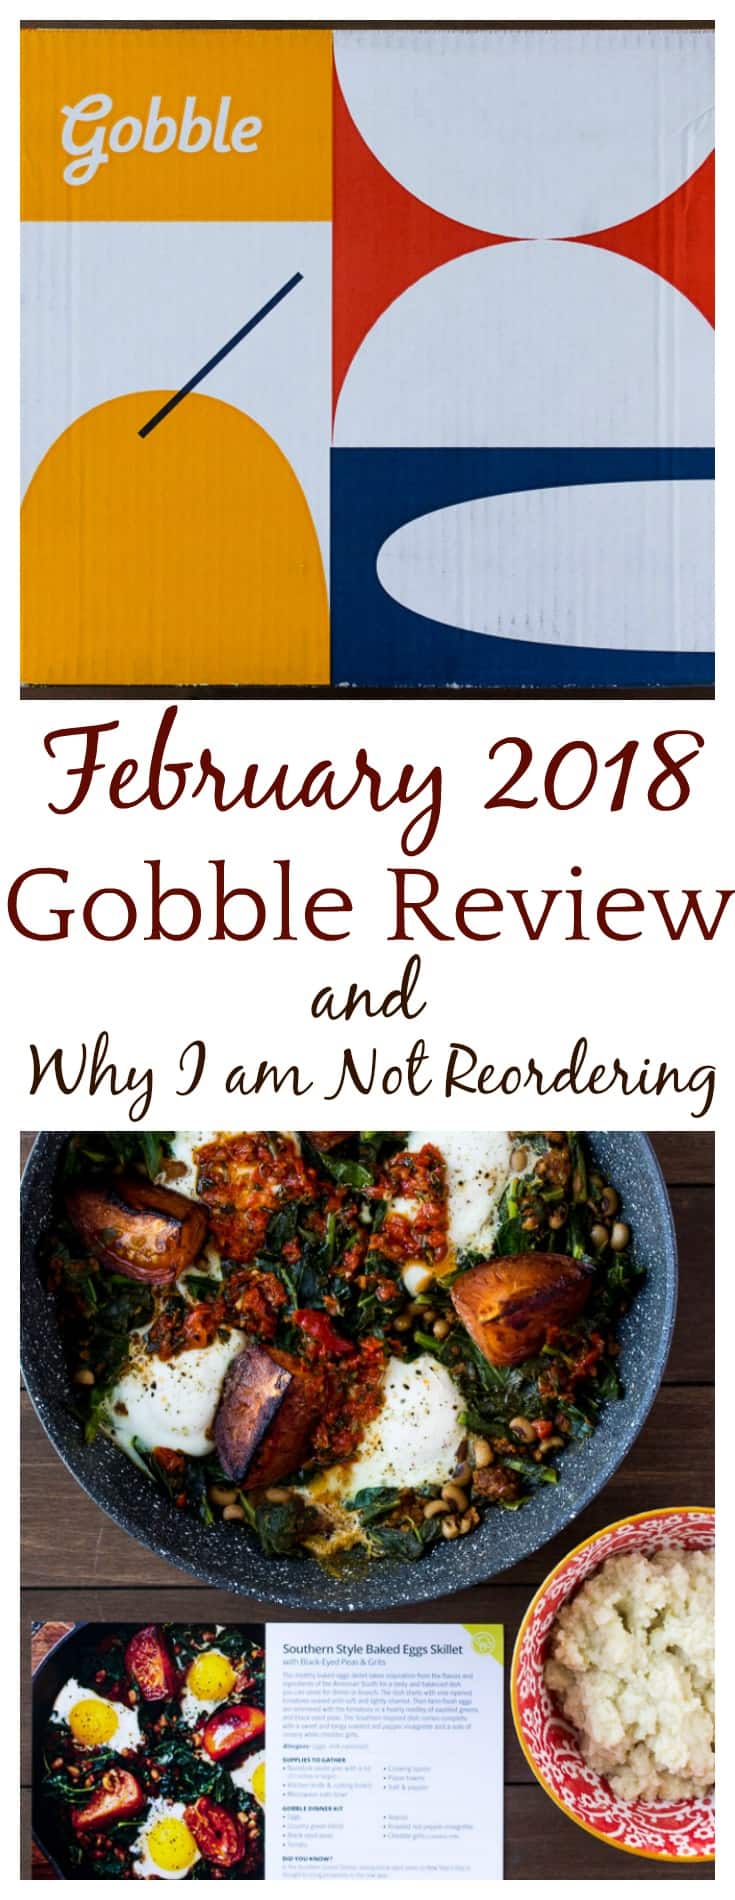 For this February 2018 Gobble review, we tried three meals and chocolate chip cookies! Unfortunately, Gobble did not win me over. See why I won't be recommending this service. | #gobble #gobblereview #mealkits #mealkitreview #subscriptionboxes 